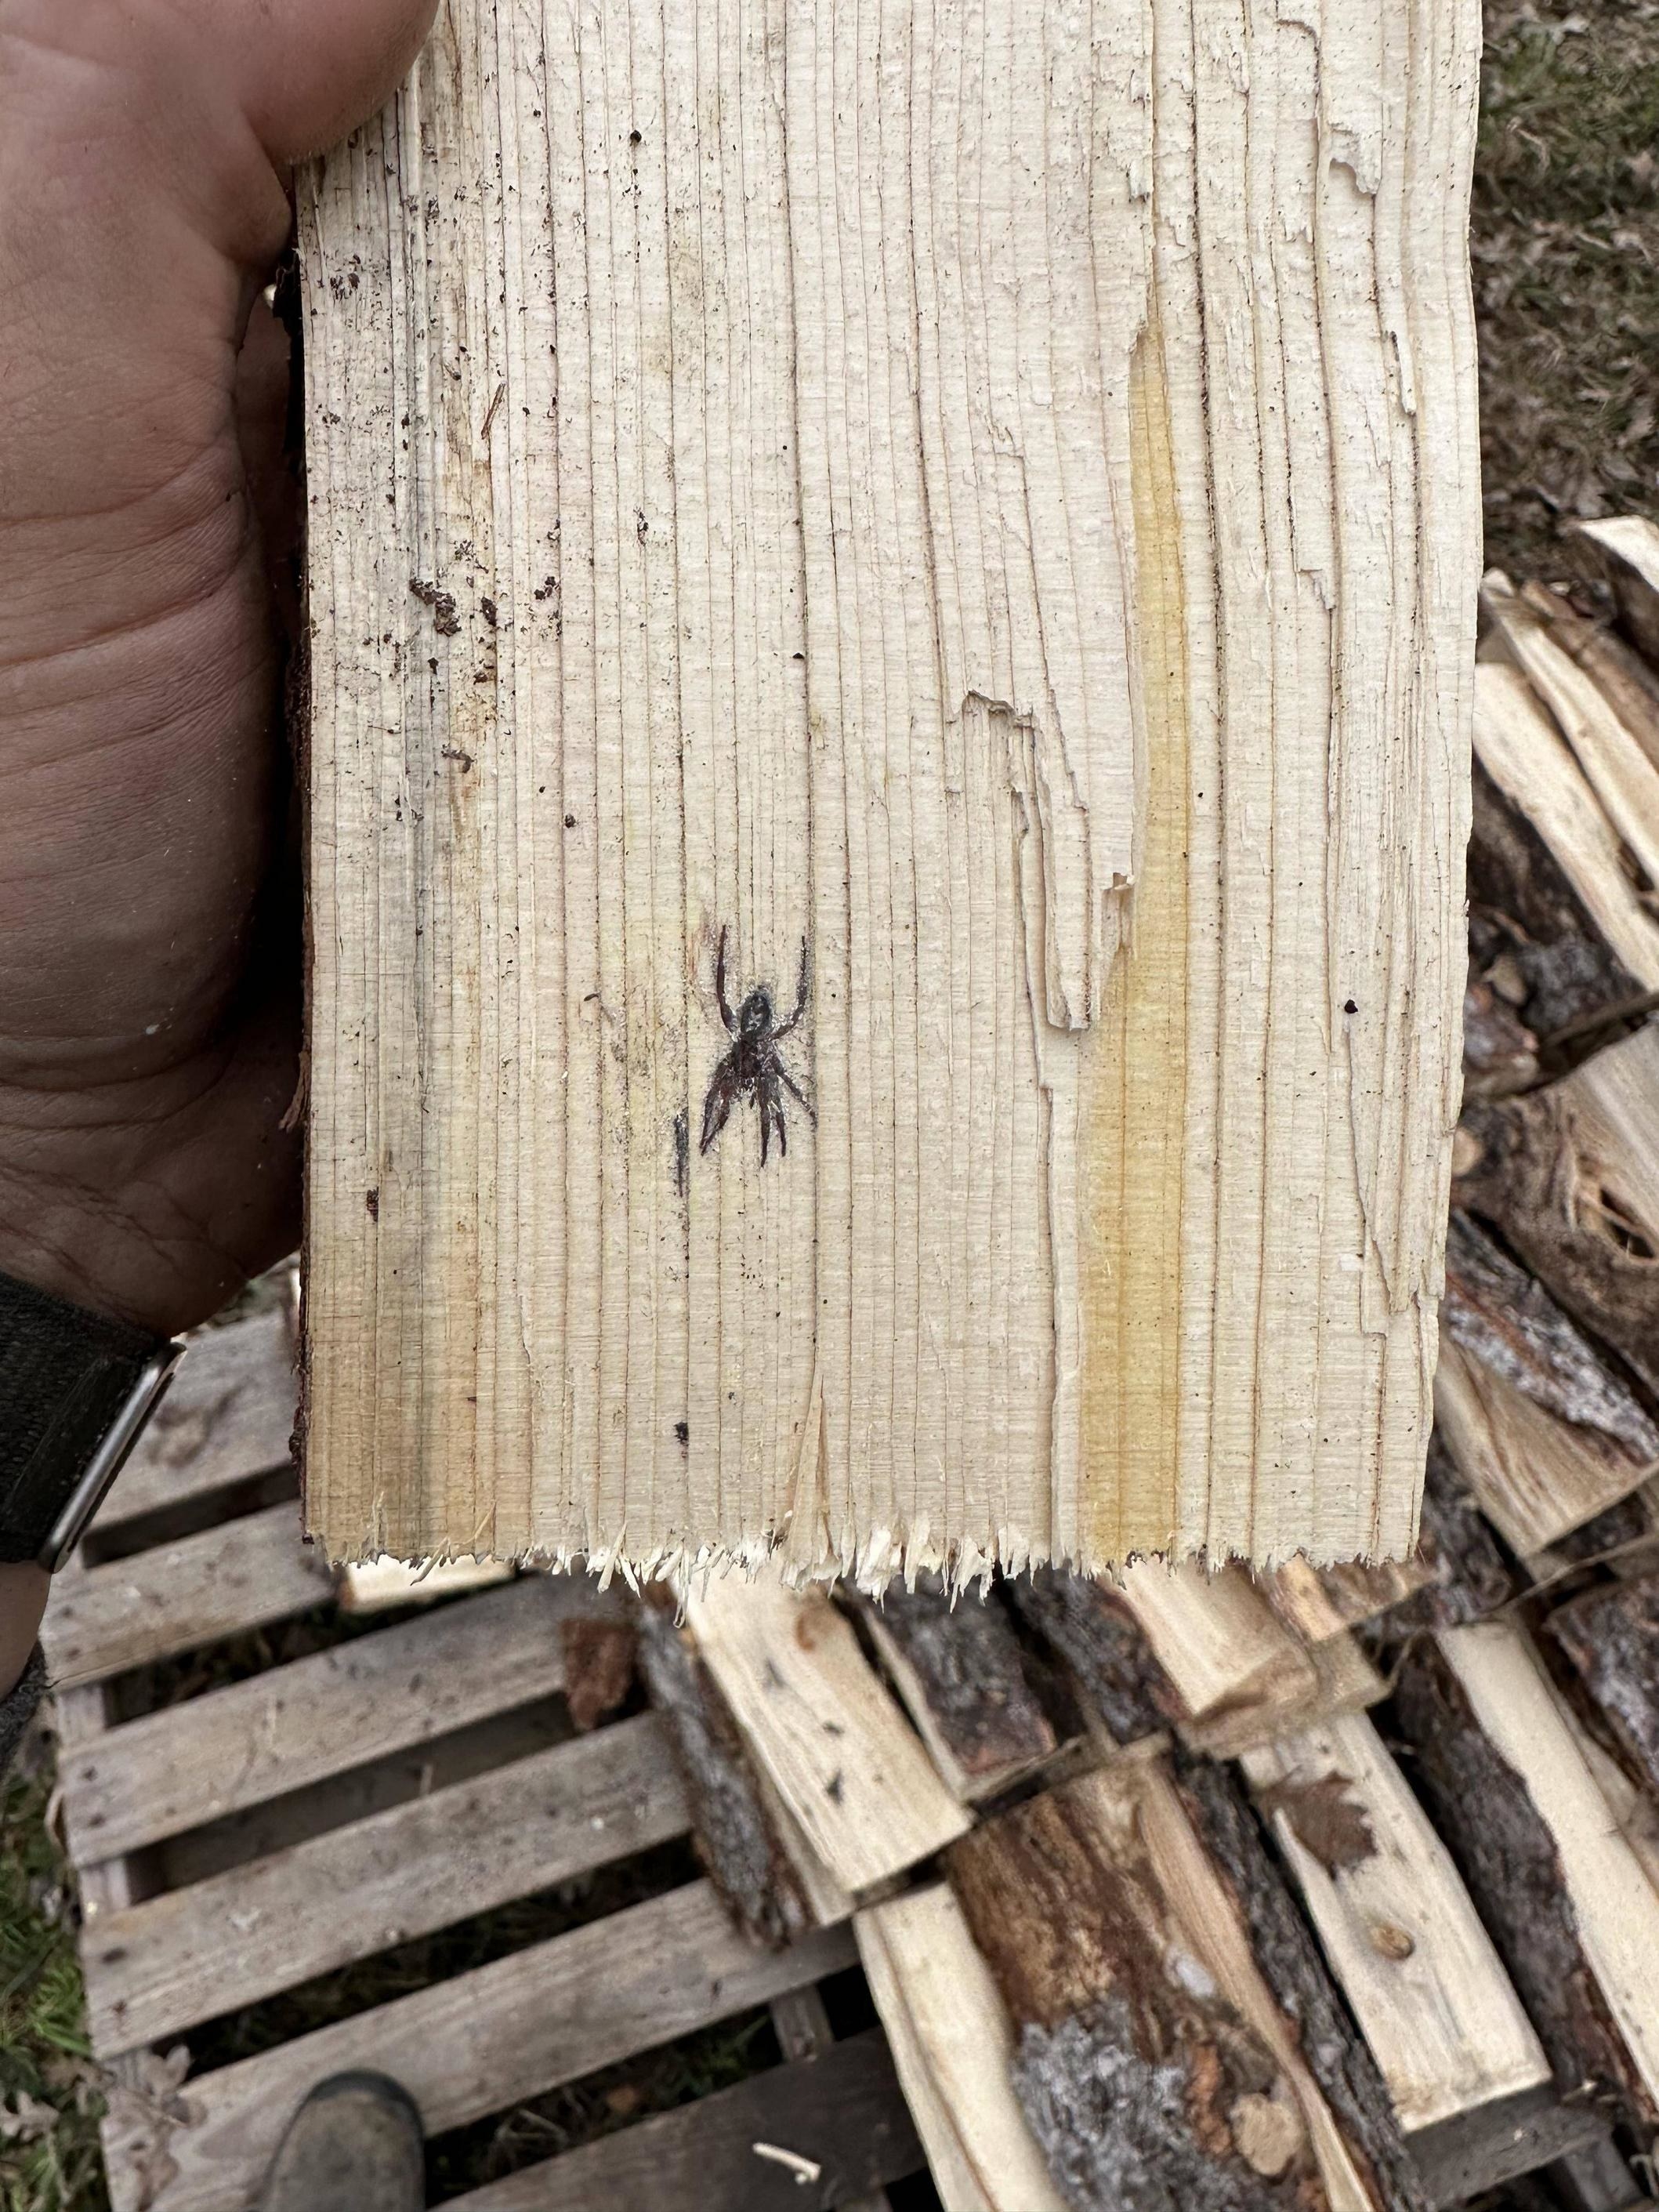 A spider embedded in wood